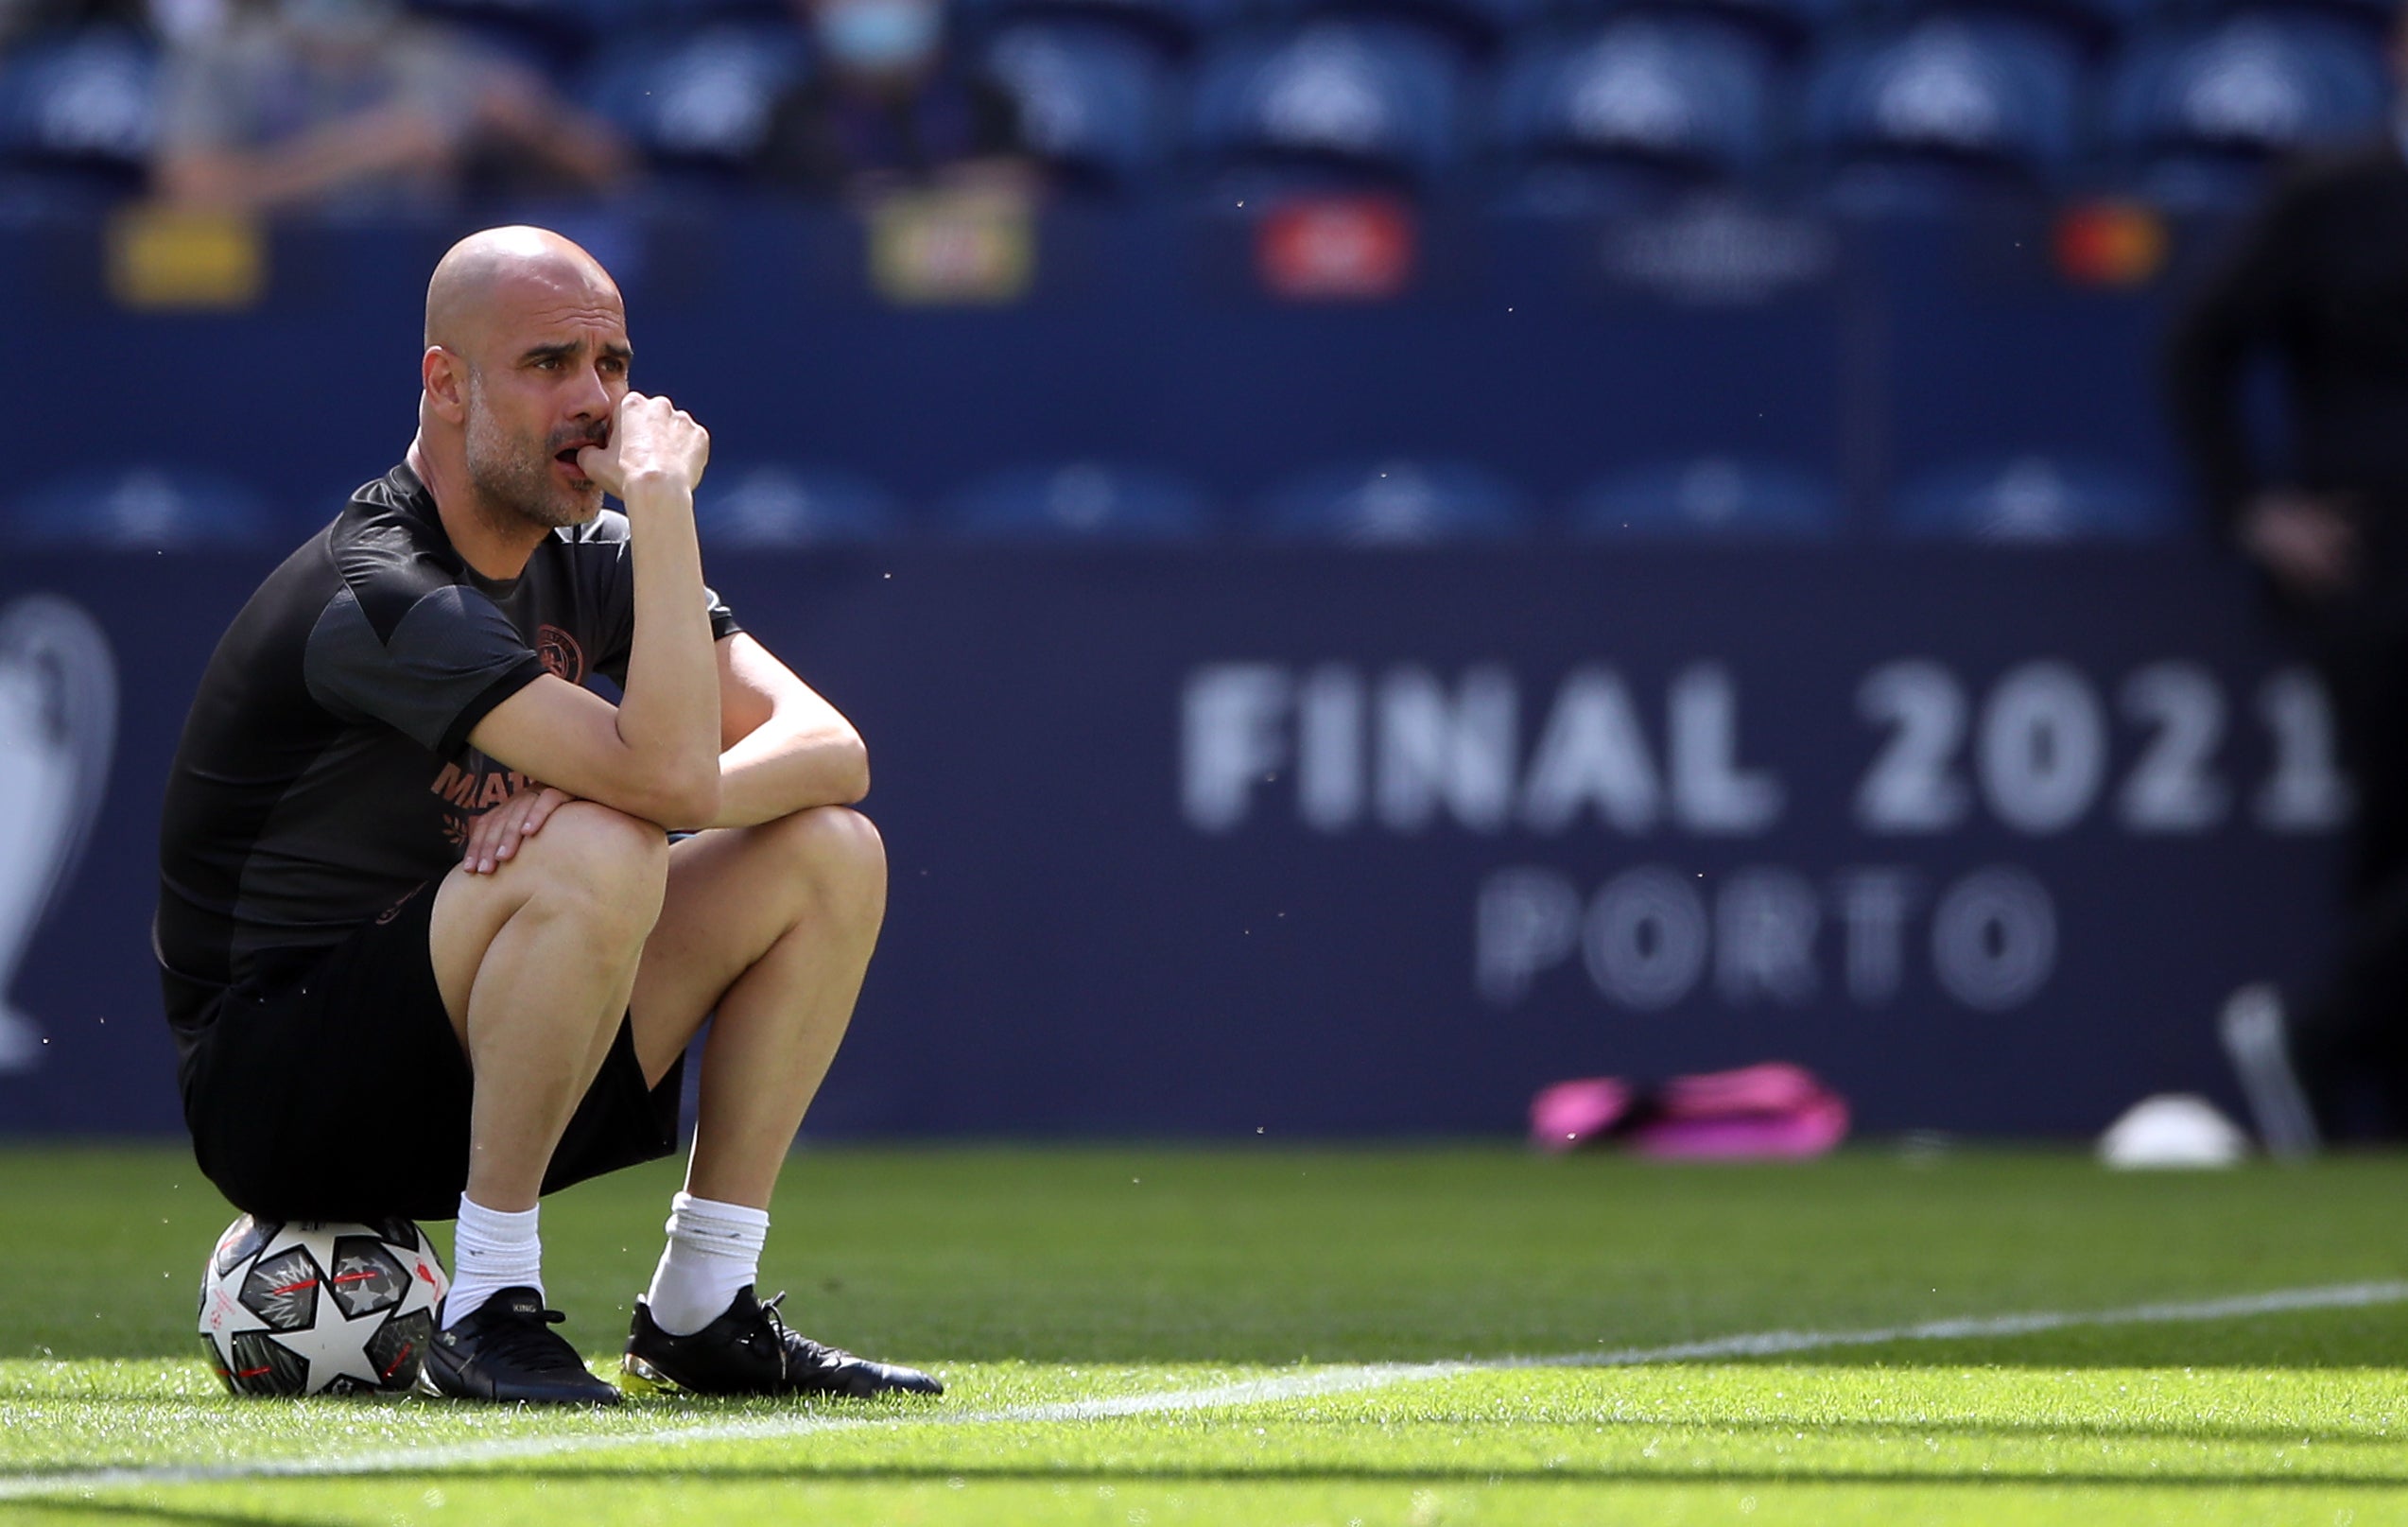 Pep Guardiola's Manchester City have had one of their pre-season friendlies cancelled